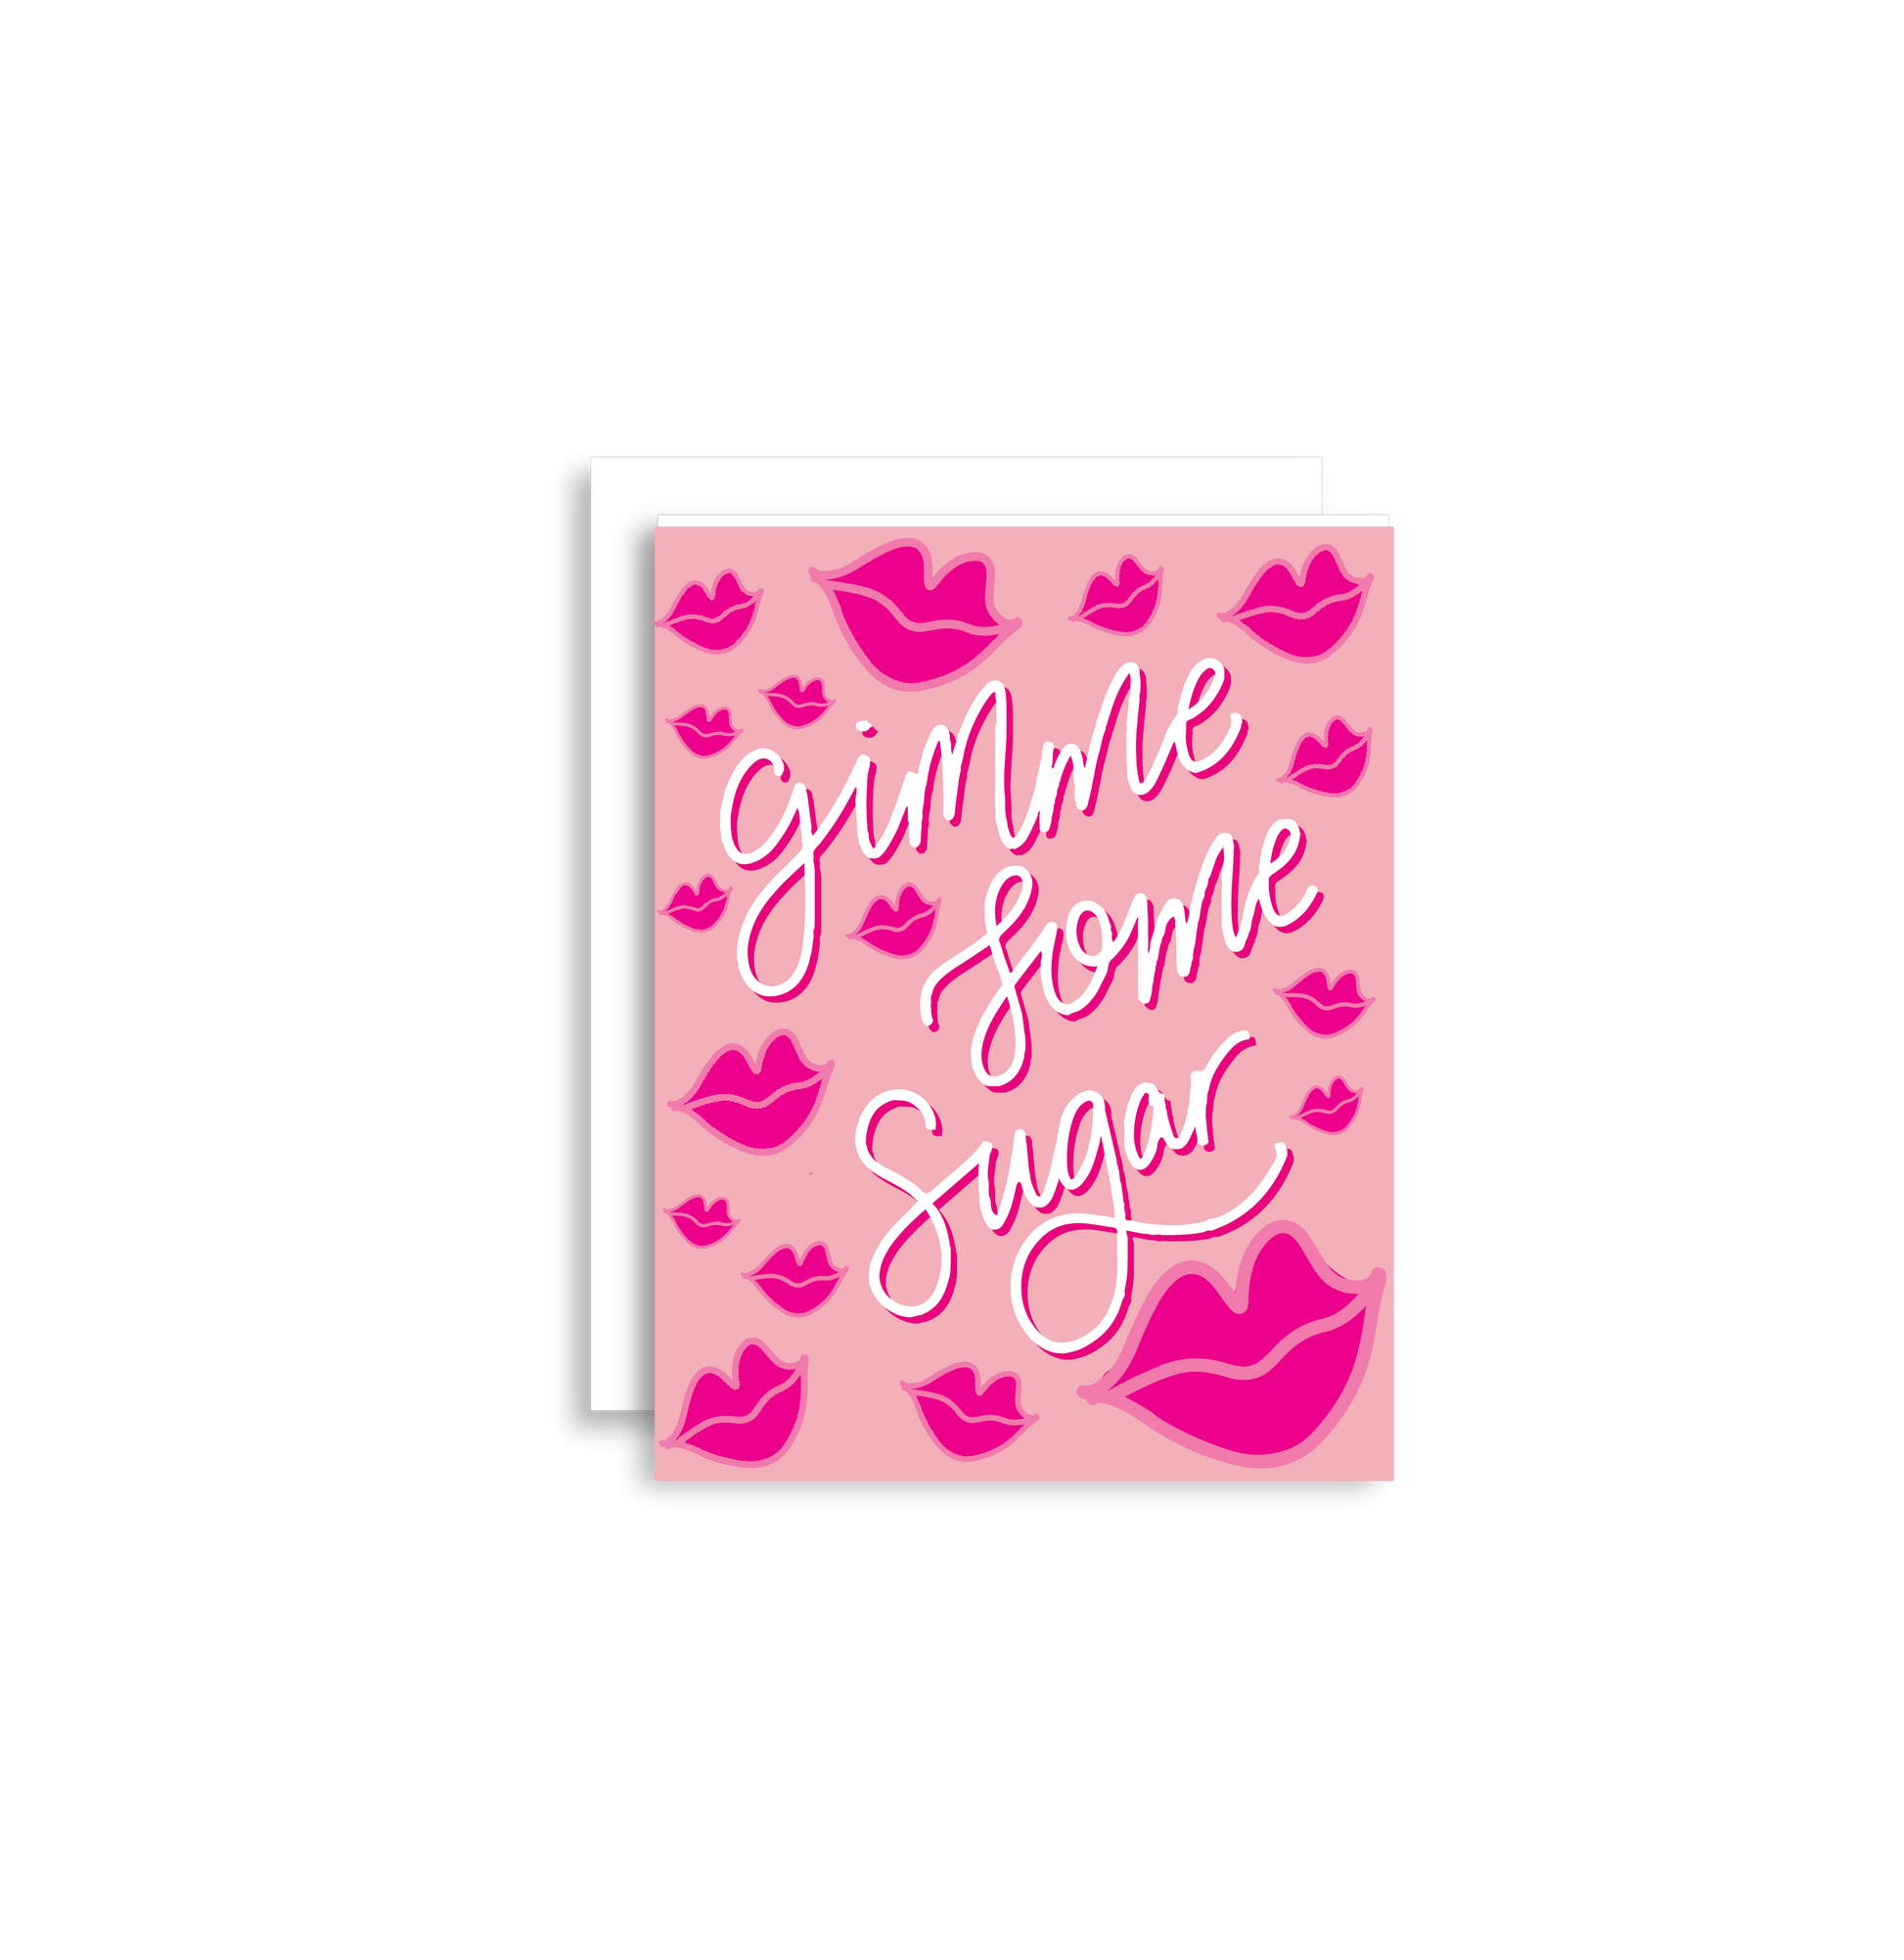 Our "Gimme Some Sugar" Valentine's Day card features hand drawn kissy lips on a pink background - it is perfect for a kid or adult! Each card is folded to 4.25" tall by 5.5" wide, is blank inside and comes with a matching white envelope. Cards are packaged in cellophane sleeves.